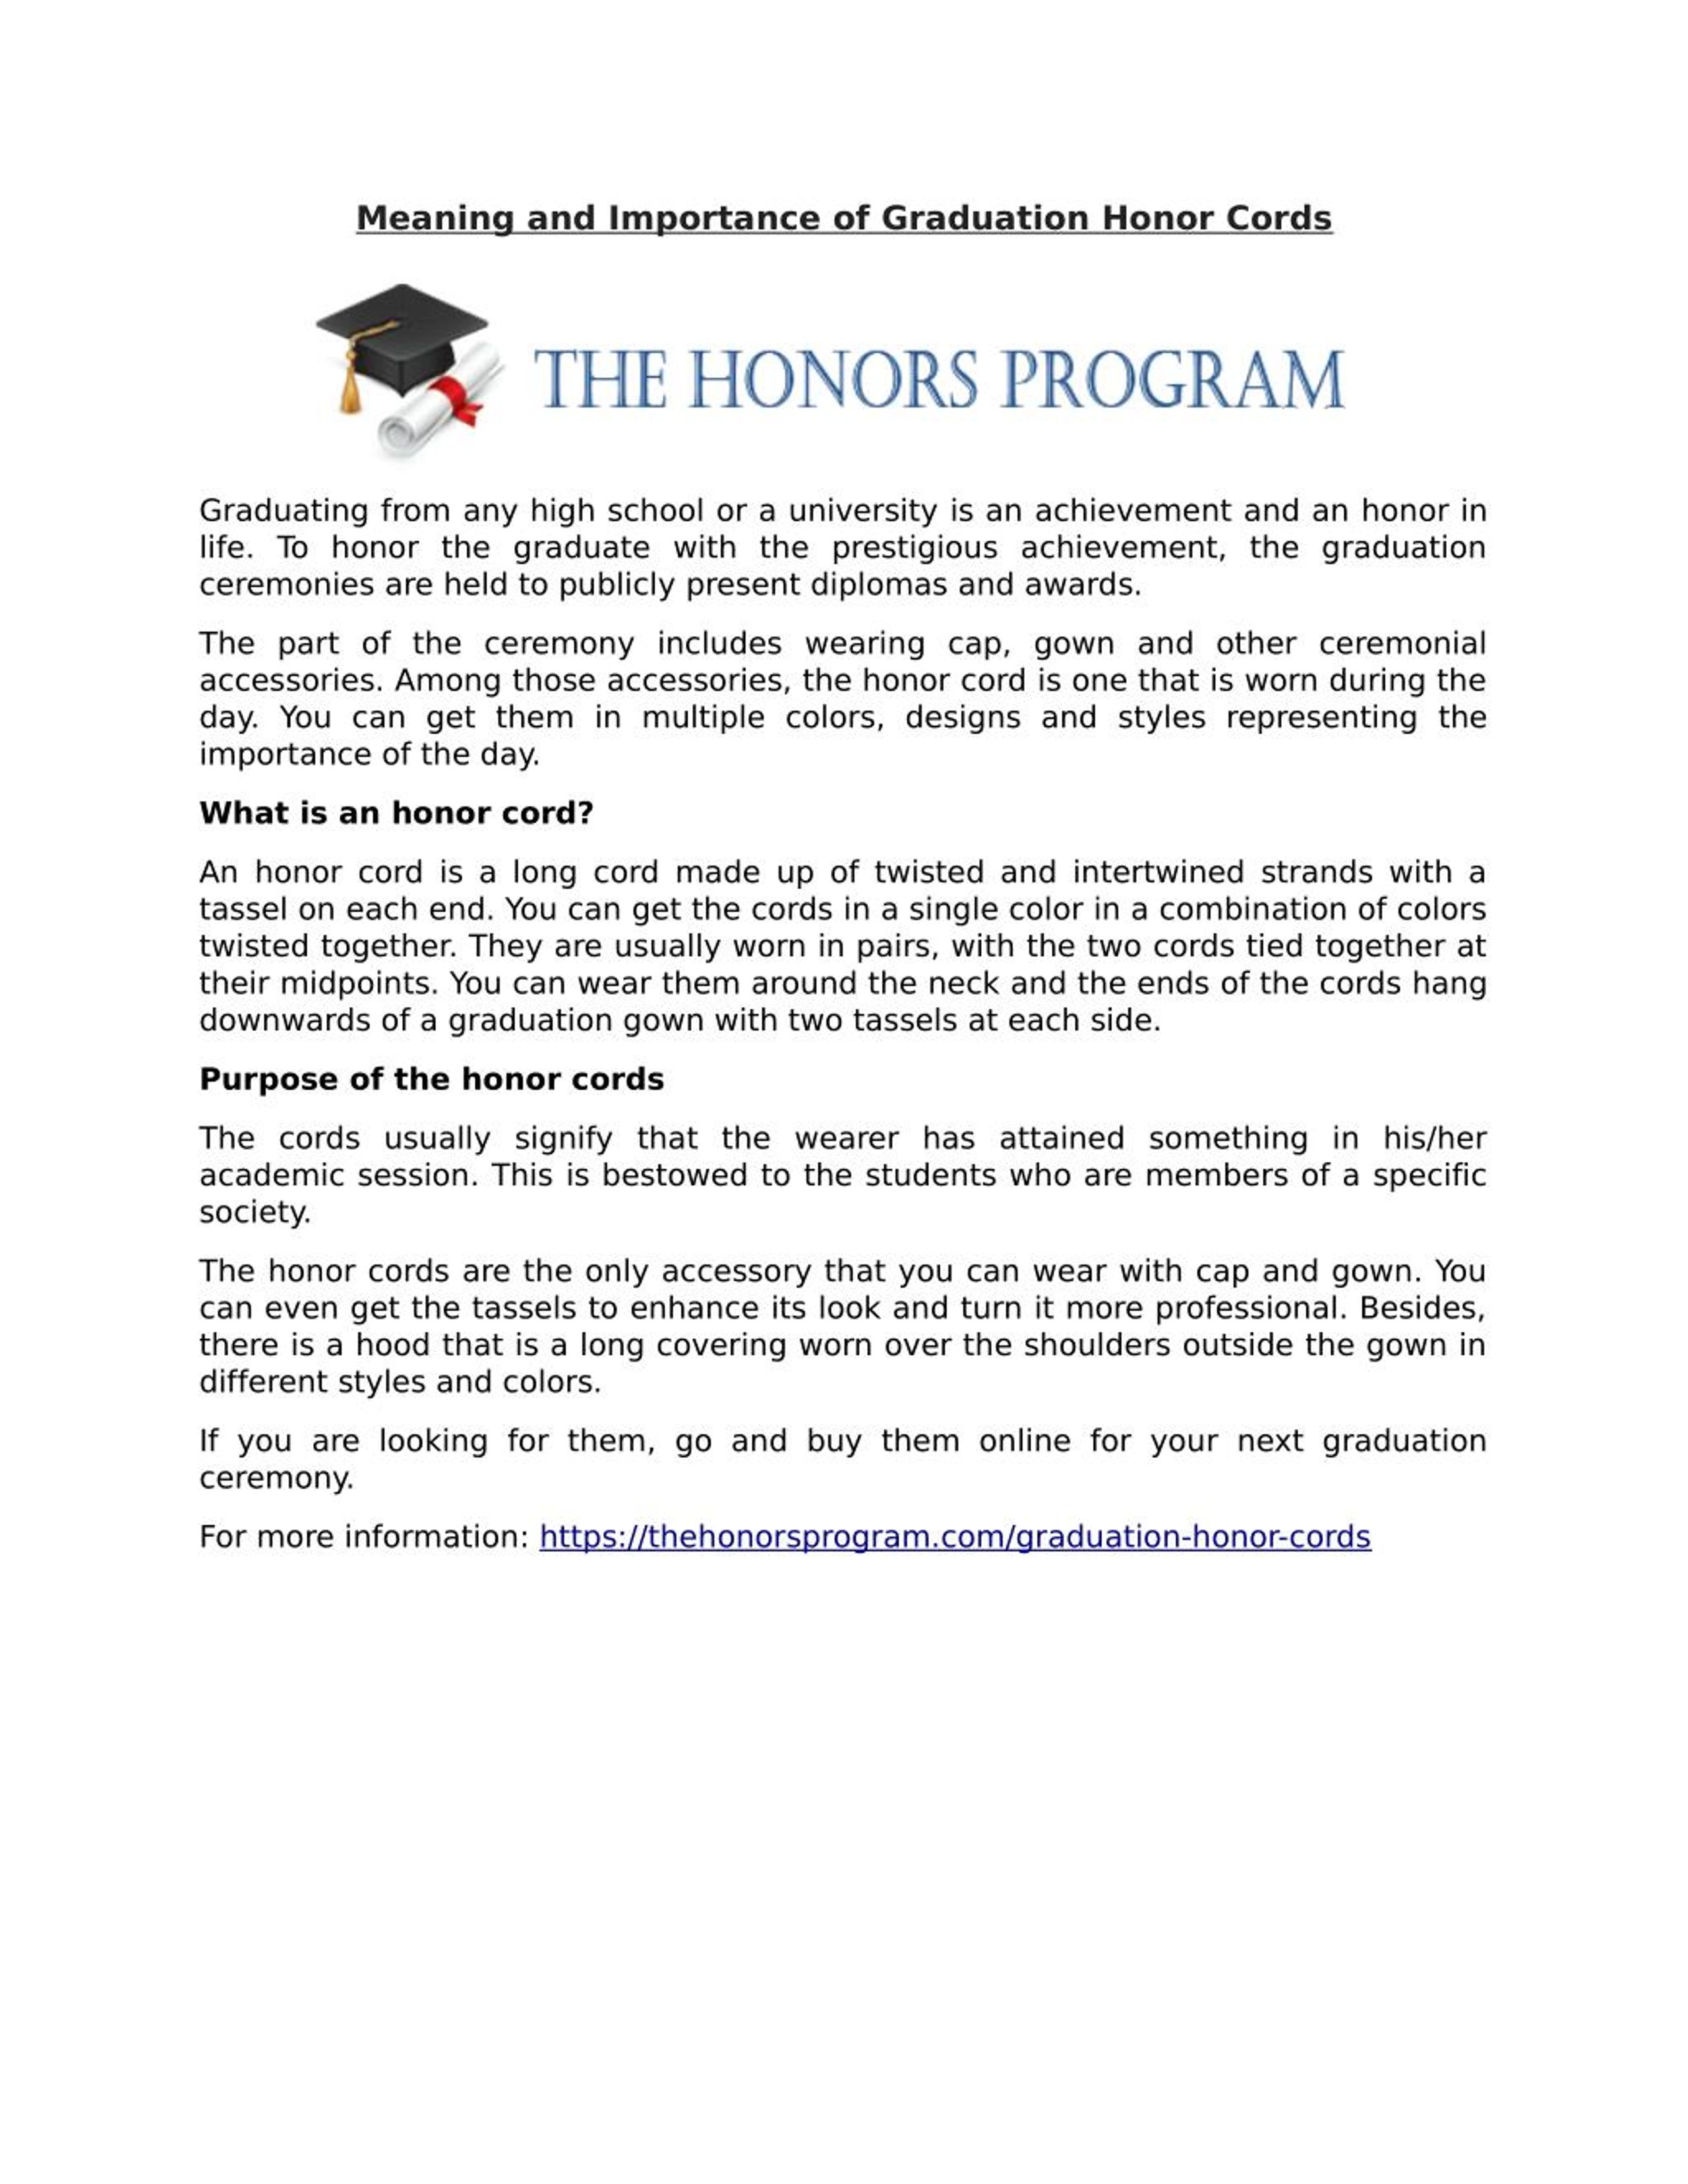 PPT - Meaning and Importance of Graduation Honor Cords PowerPoint